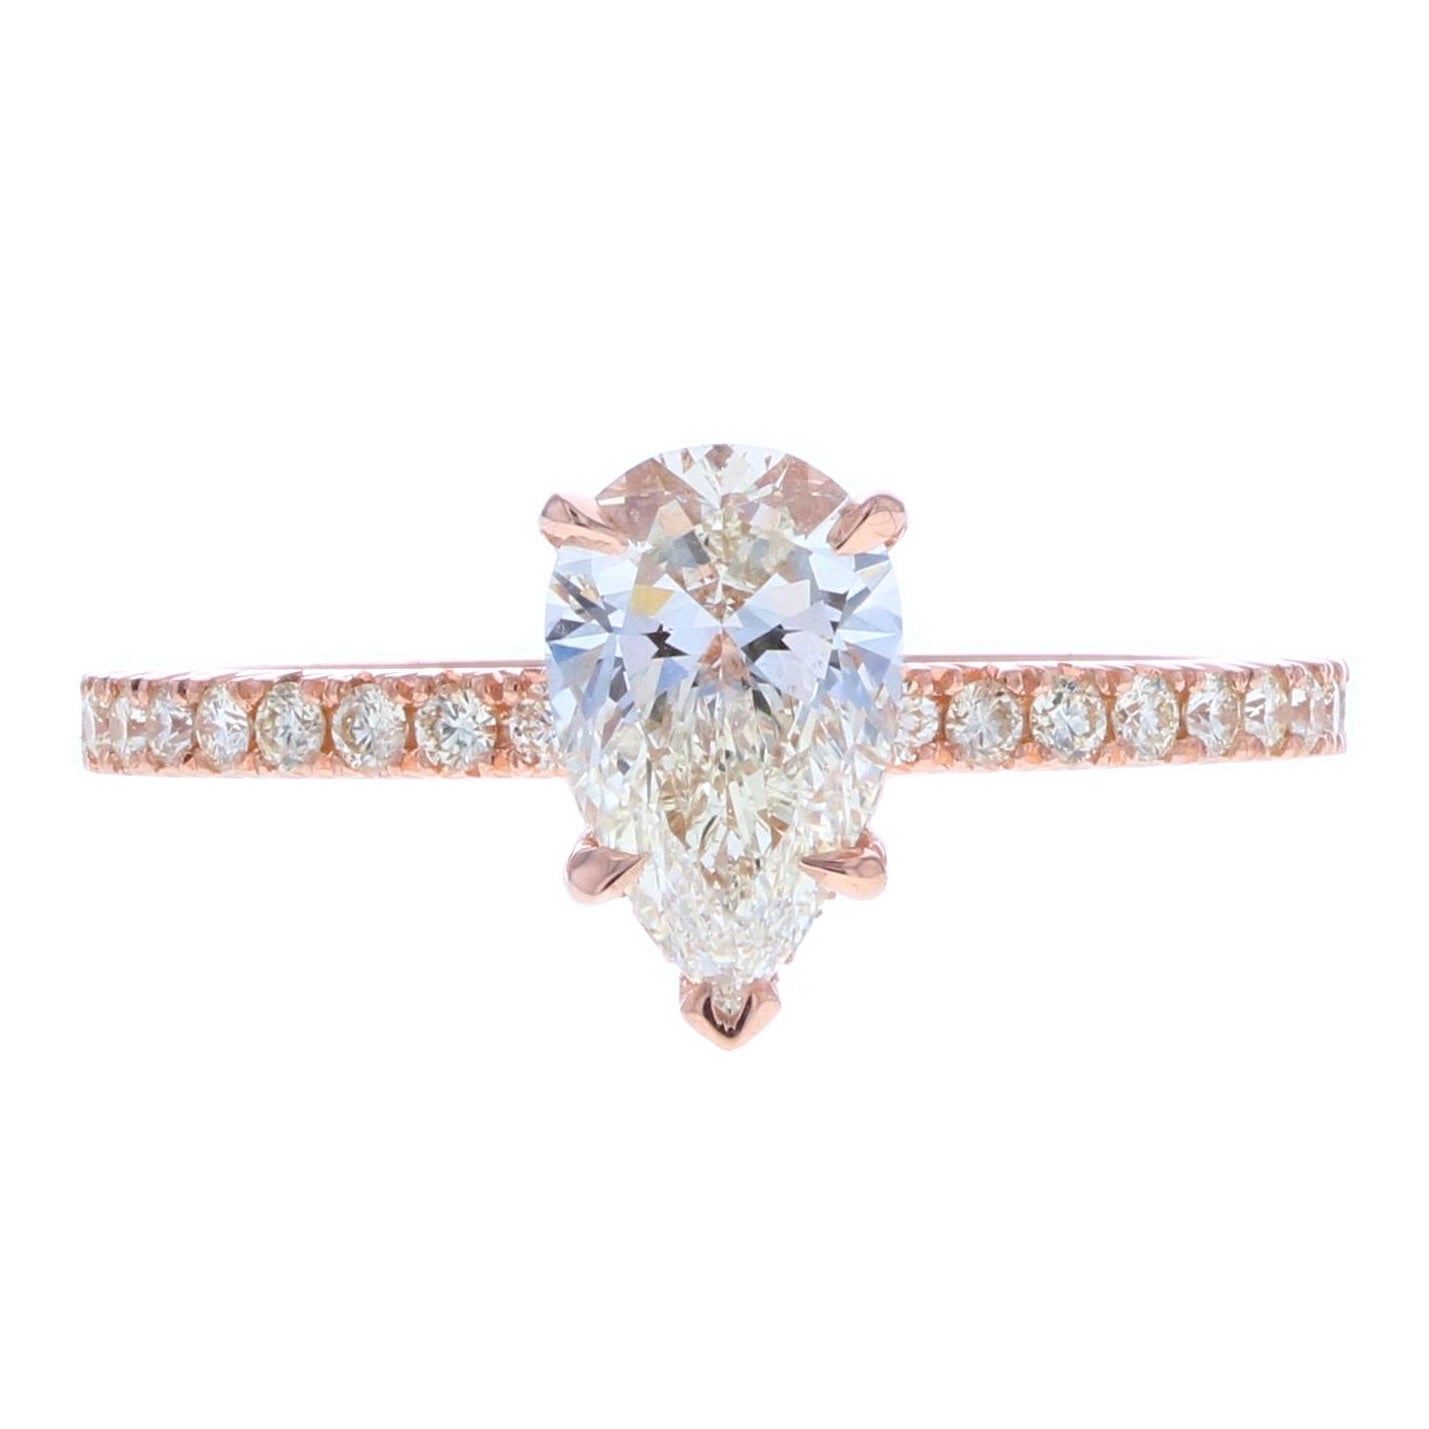 Pear Shape Pave Diamond Engagement Ring in Rose Gold with Diamond Pave & Hidden Halo